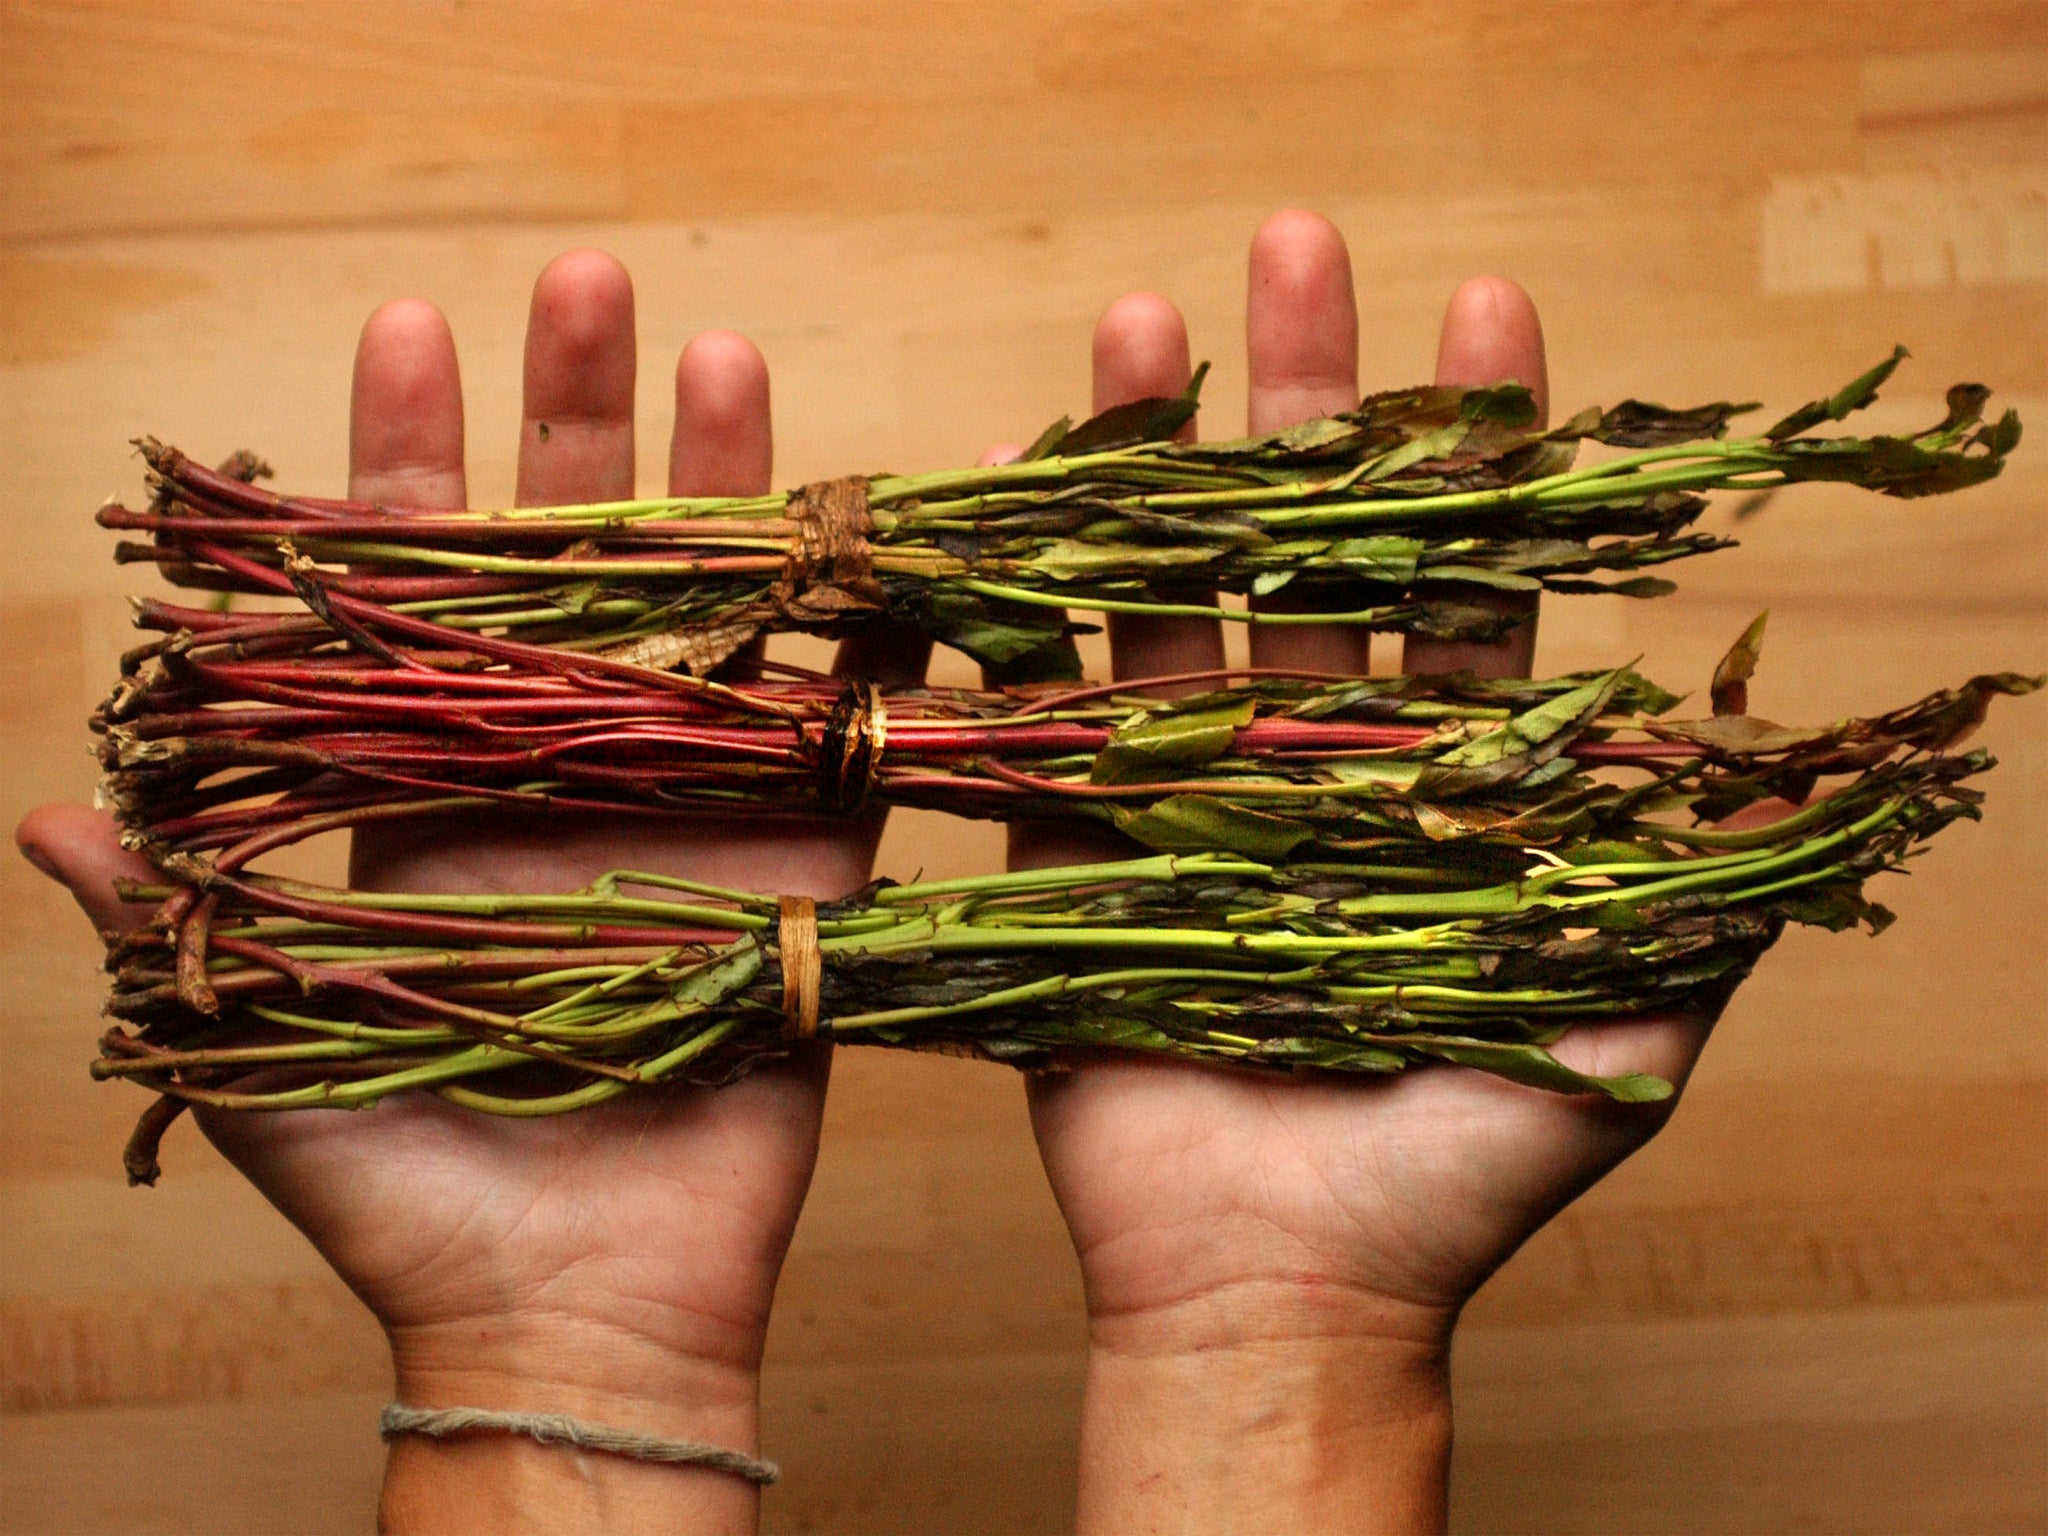 Khat is banned in the Netherlands